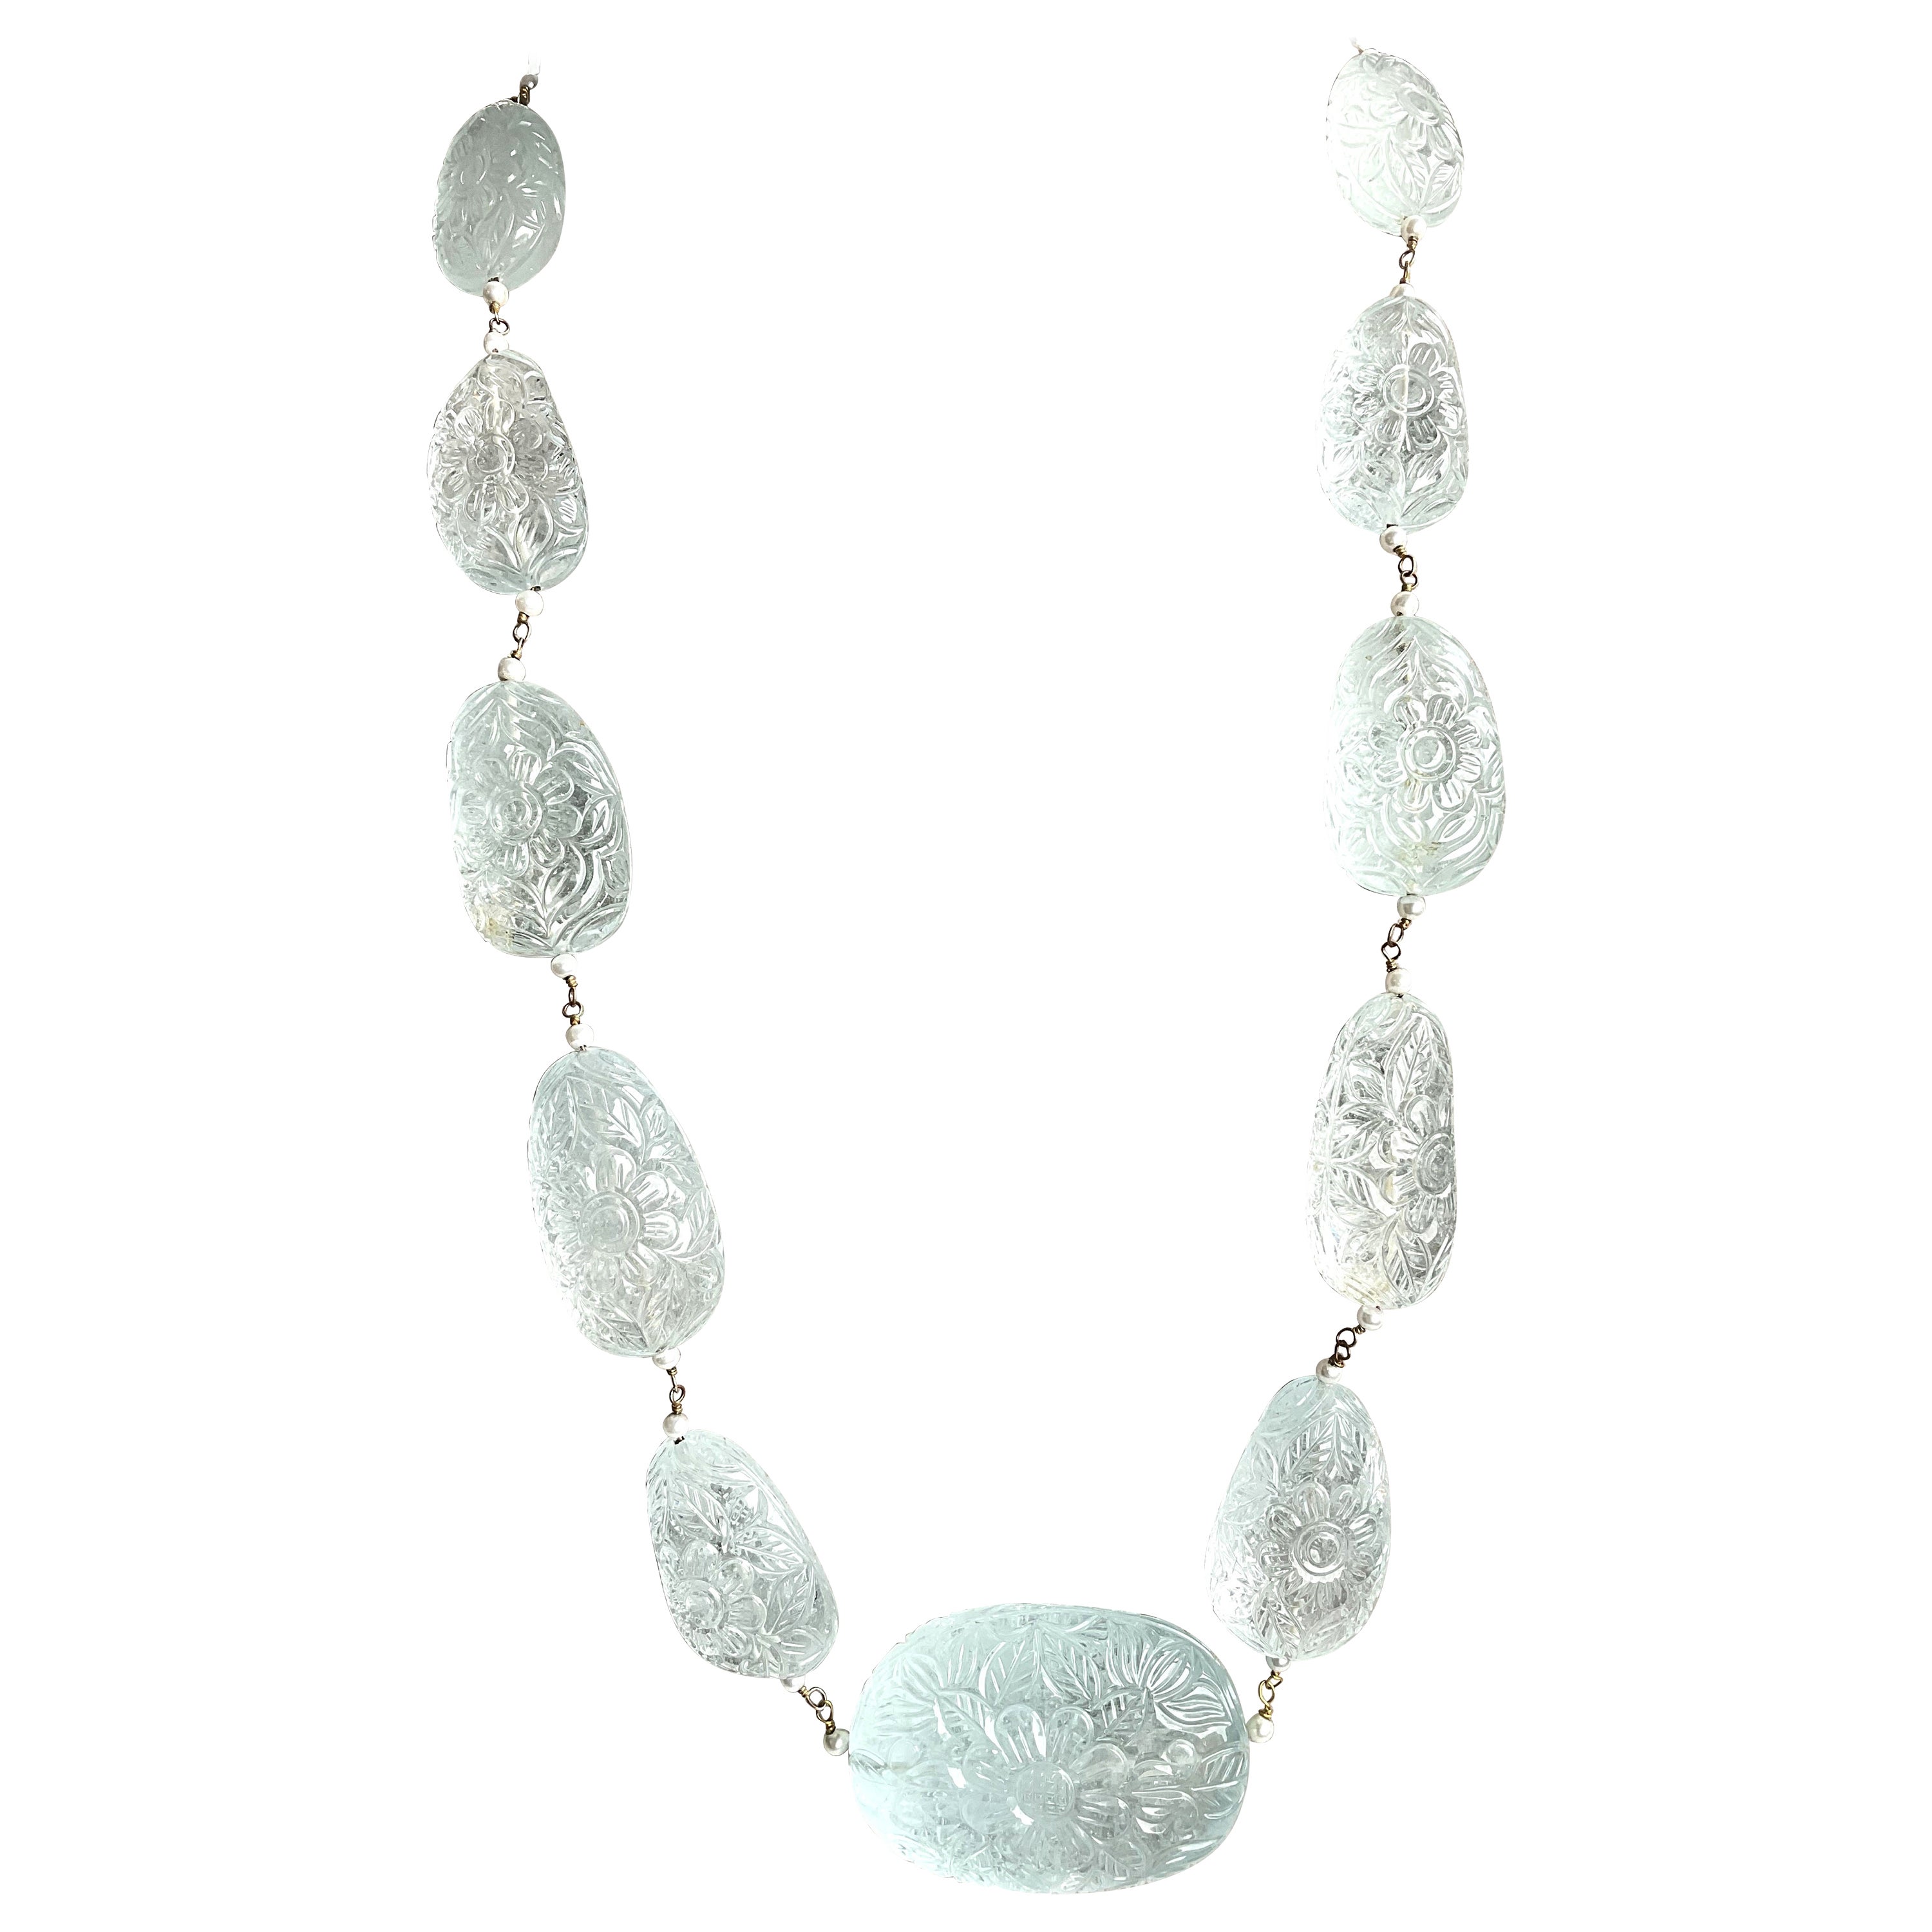 1828.70 Carats Aquamarine Carved Tumbled Necklace Top Quality Natural Gemstone